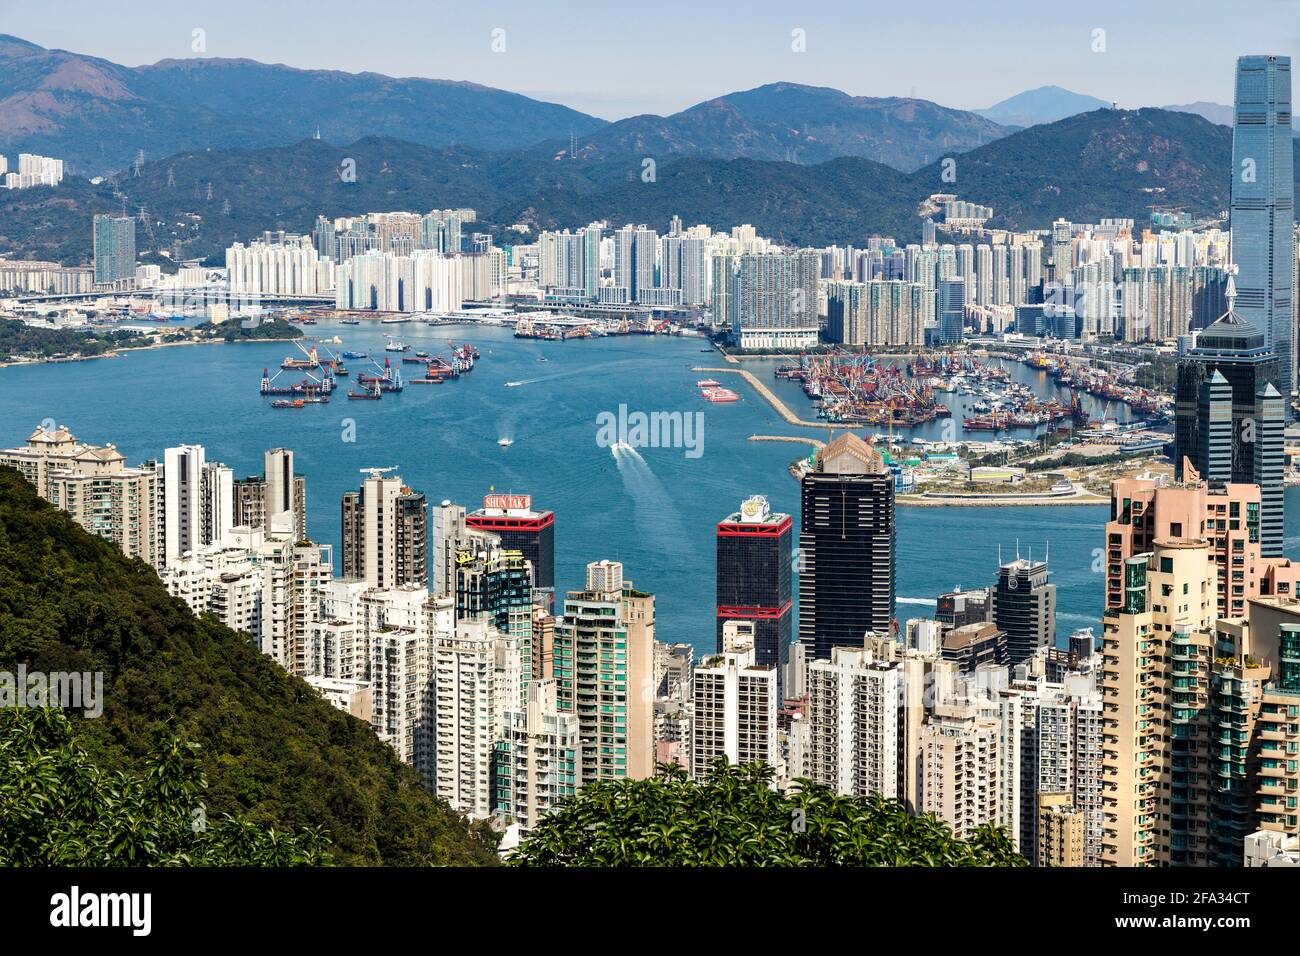 View across Hong Kong from Victoria Peak. Popular travel destination. Harbour and high-rise buildings dominate the skyline landscape. Stock Photo